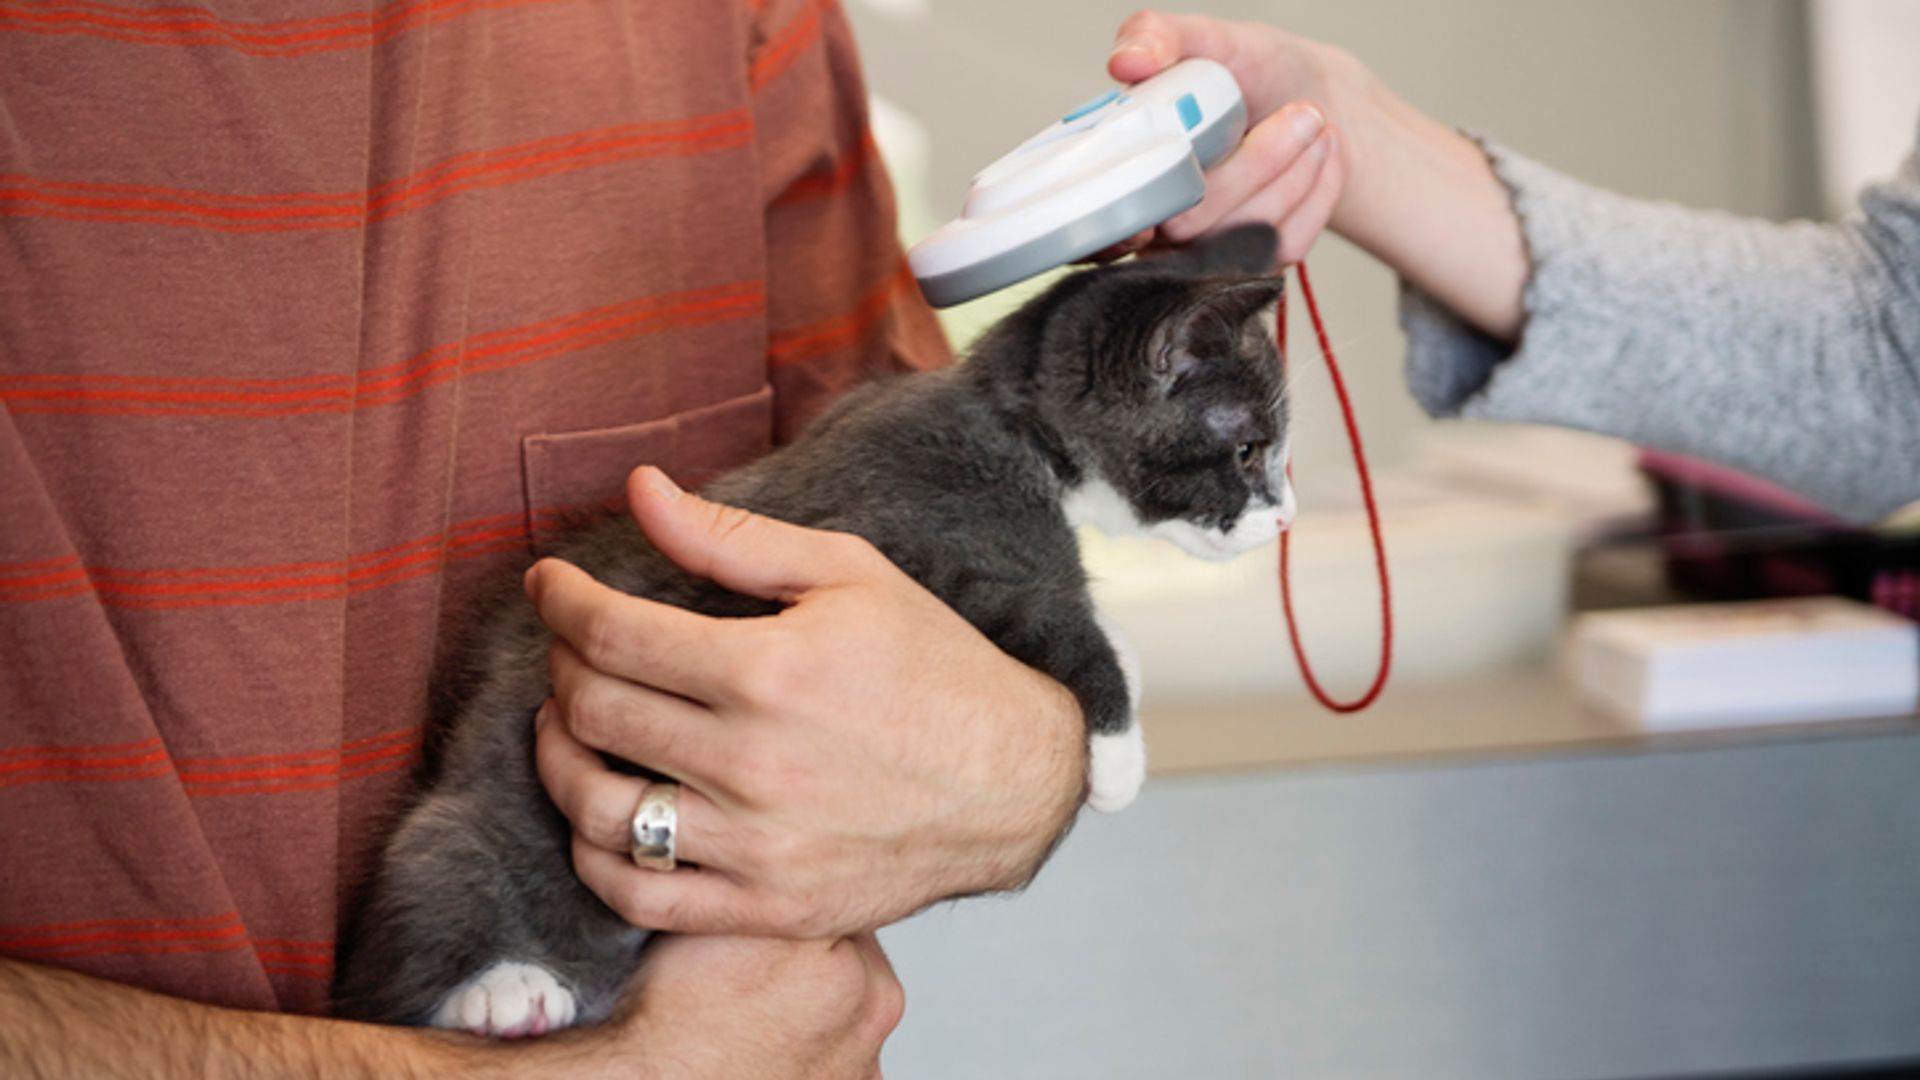 Deadline nears for cat owners to microchip pets or face fine